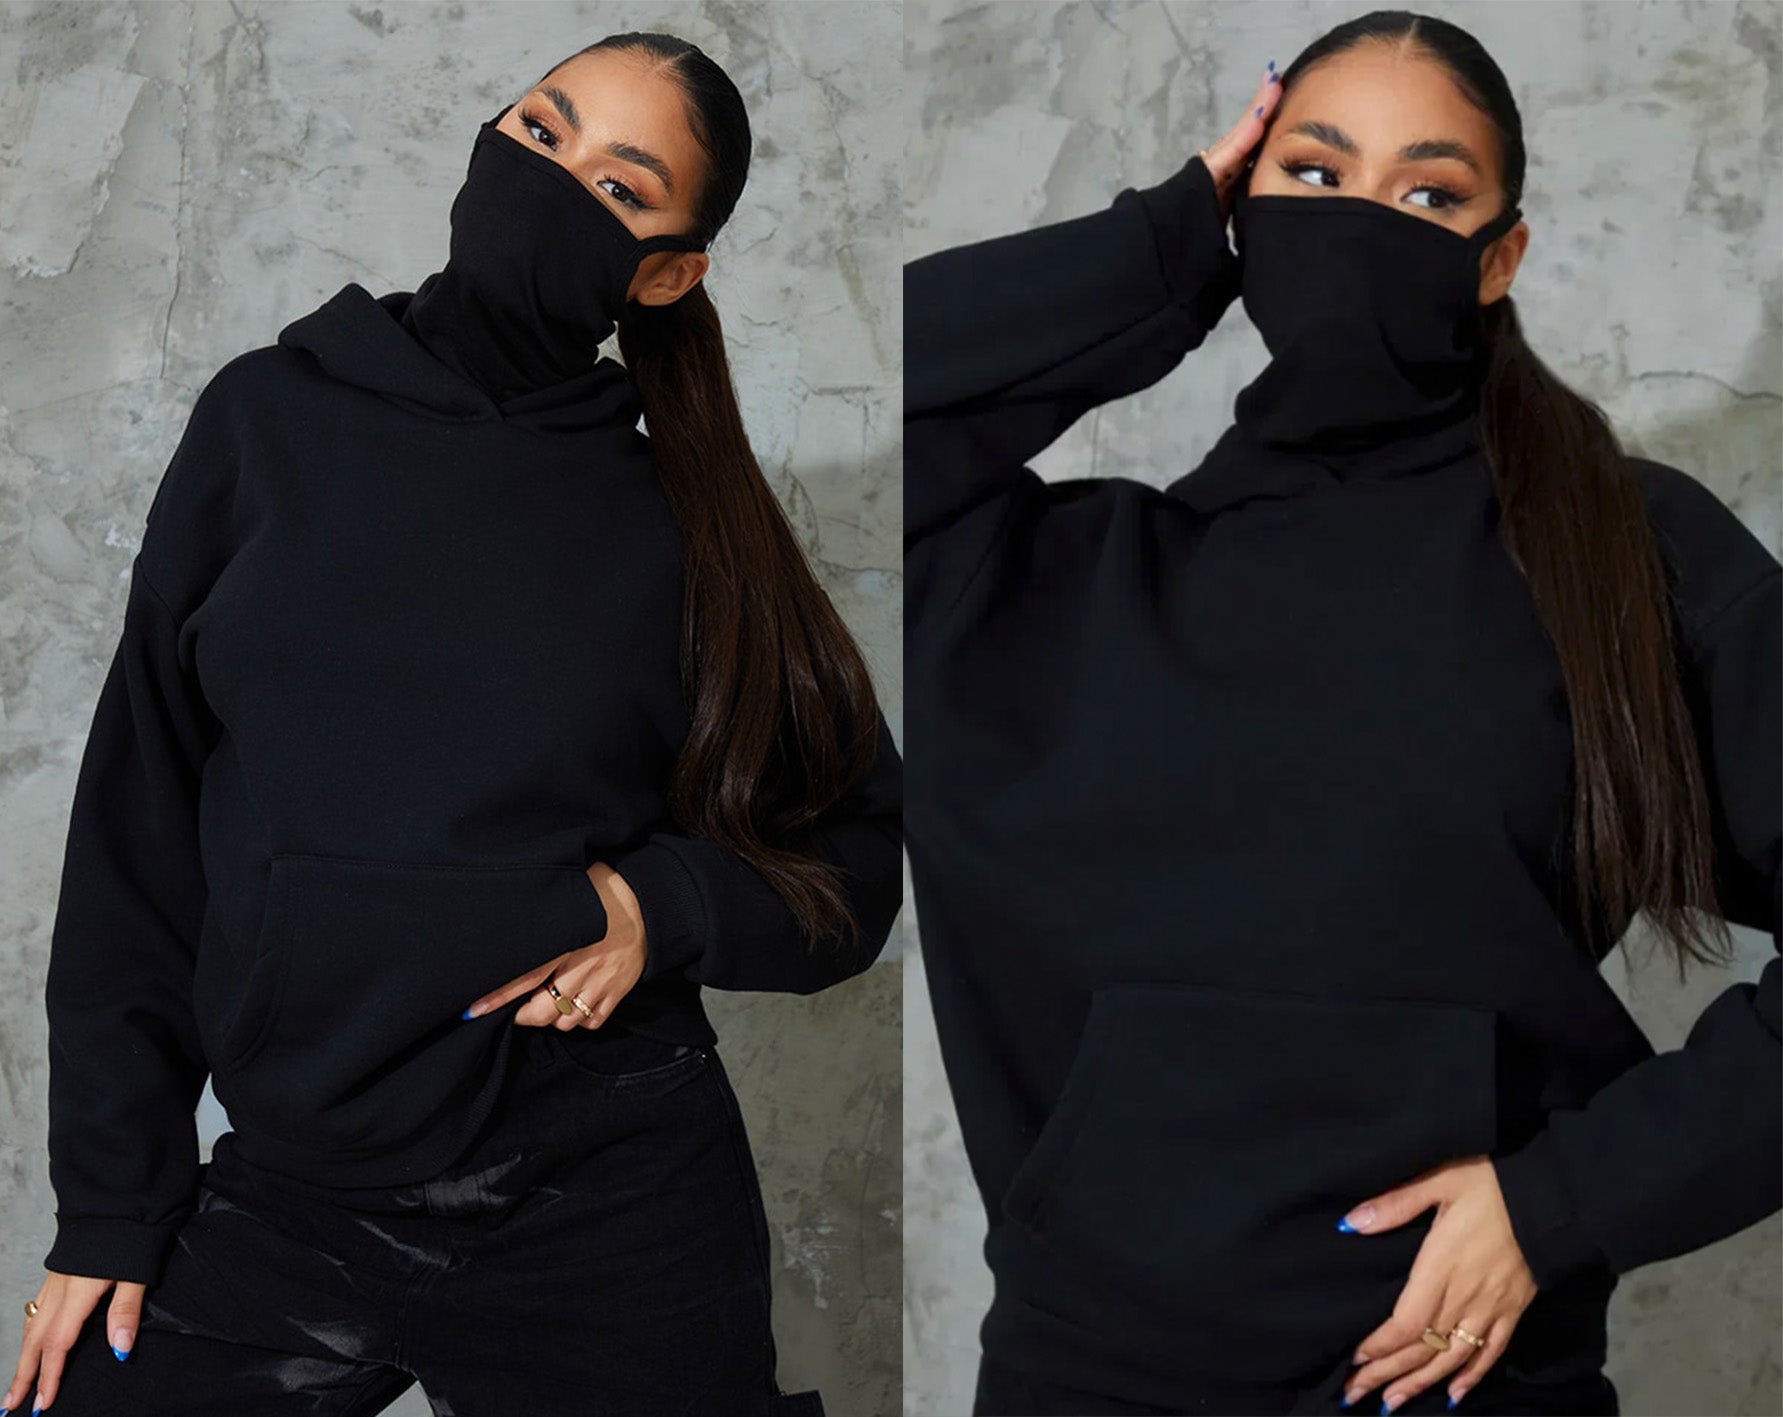 PrettyLittleThing selling £16 'mask hoodie' with built-in face